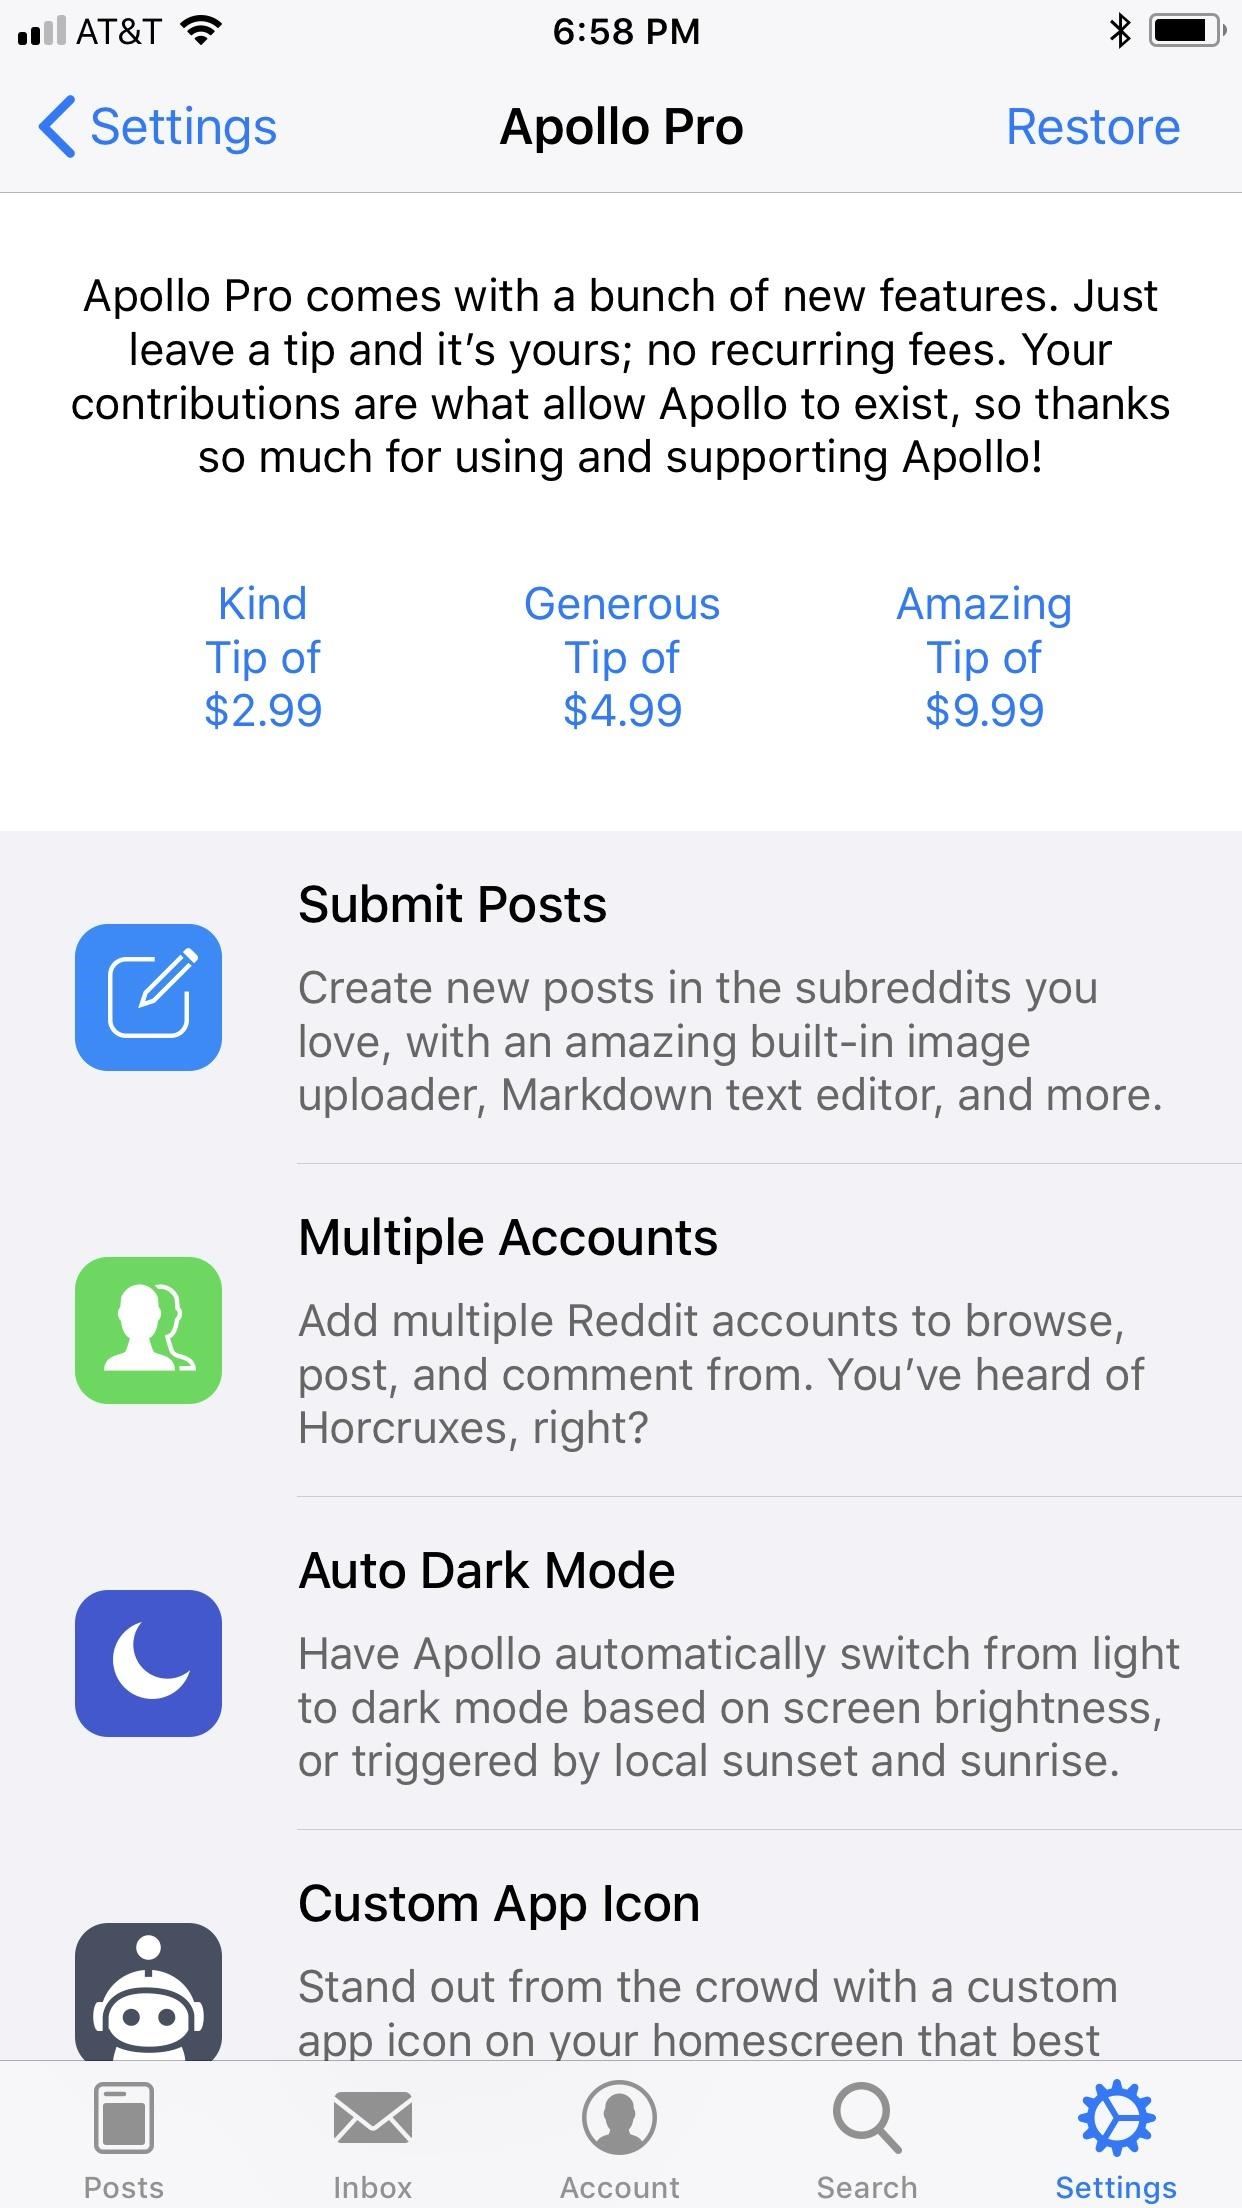 Is It Worth It?: Should You Pay to Browse Reddit on Your iPhone?